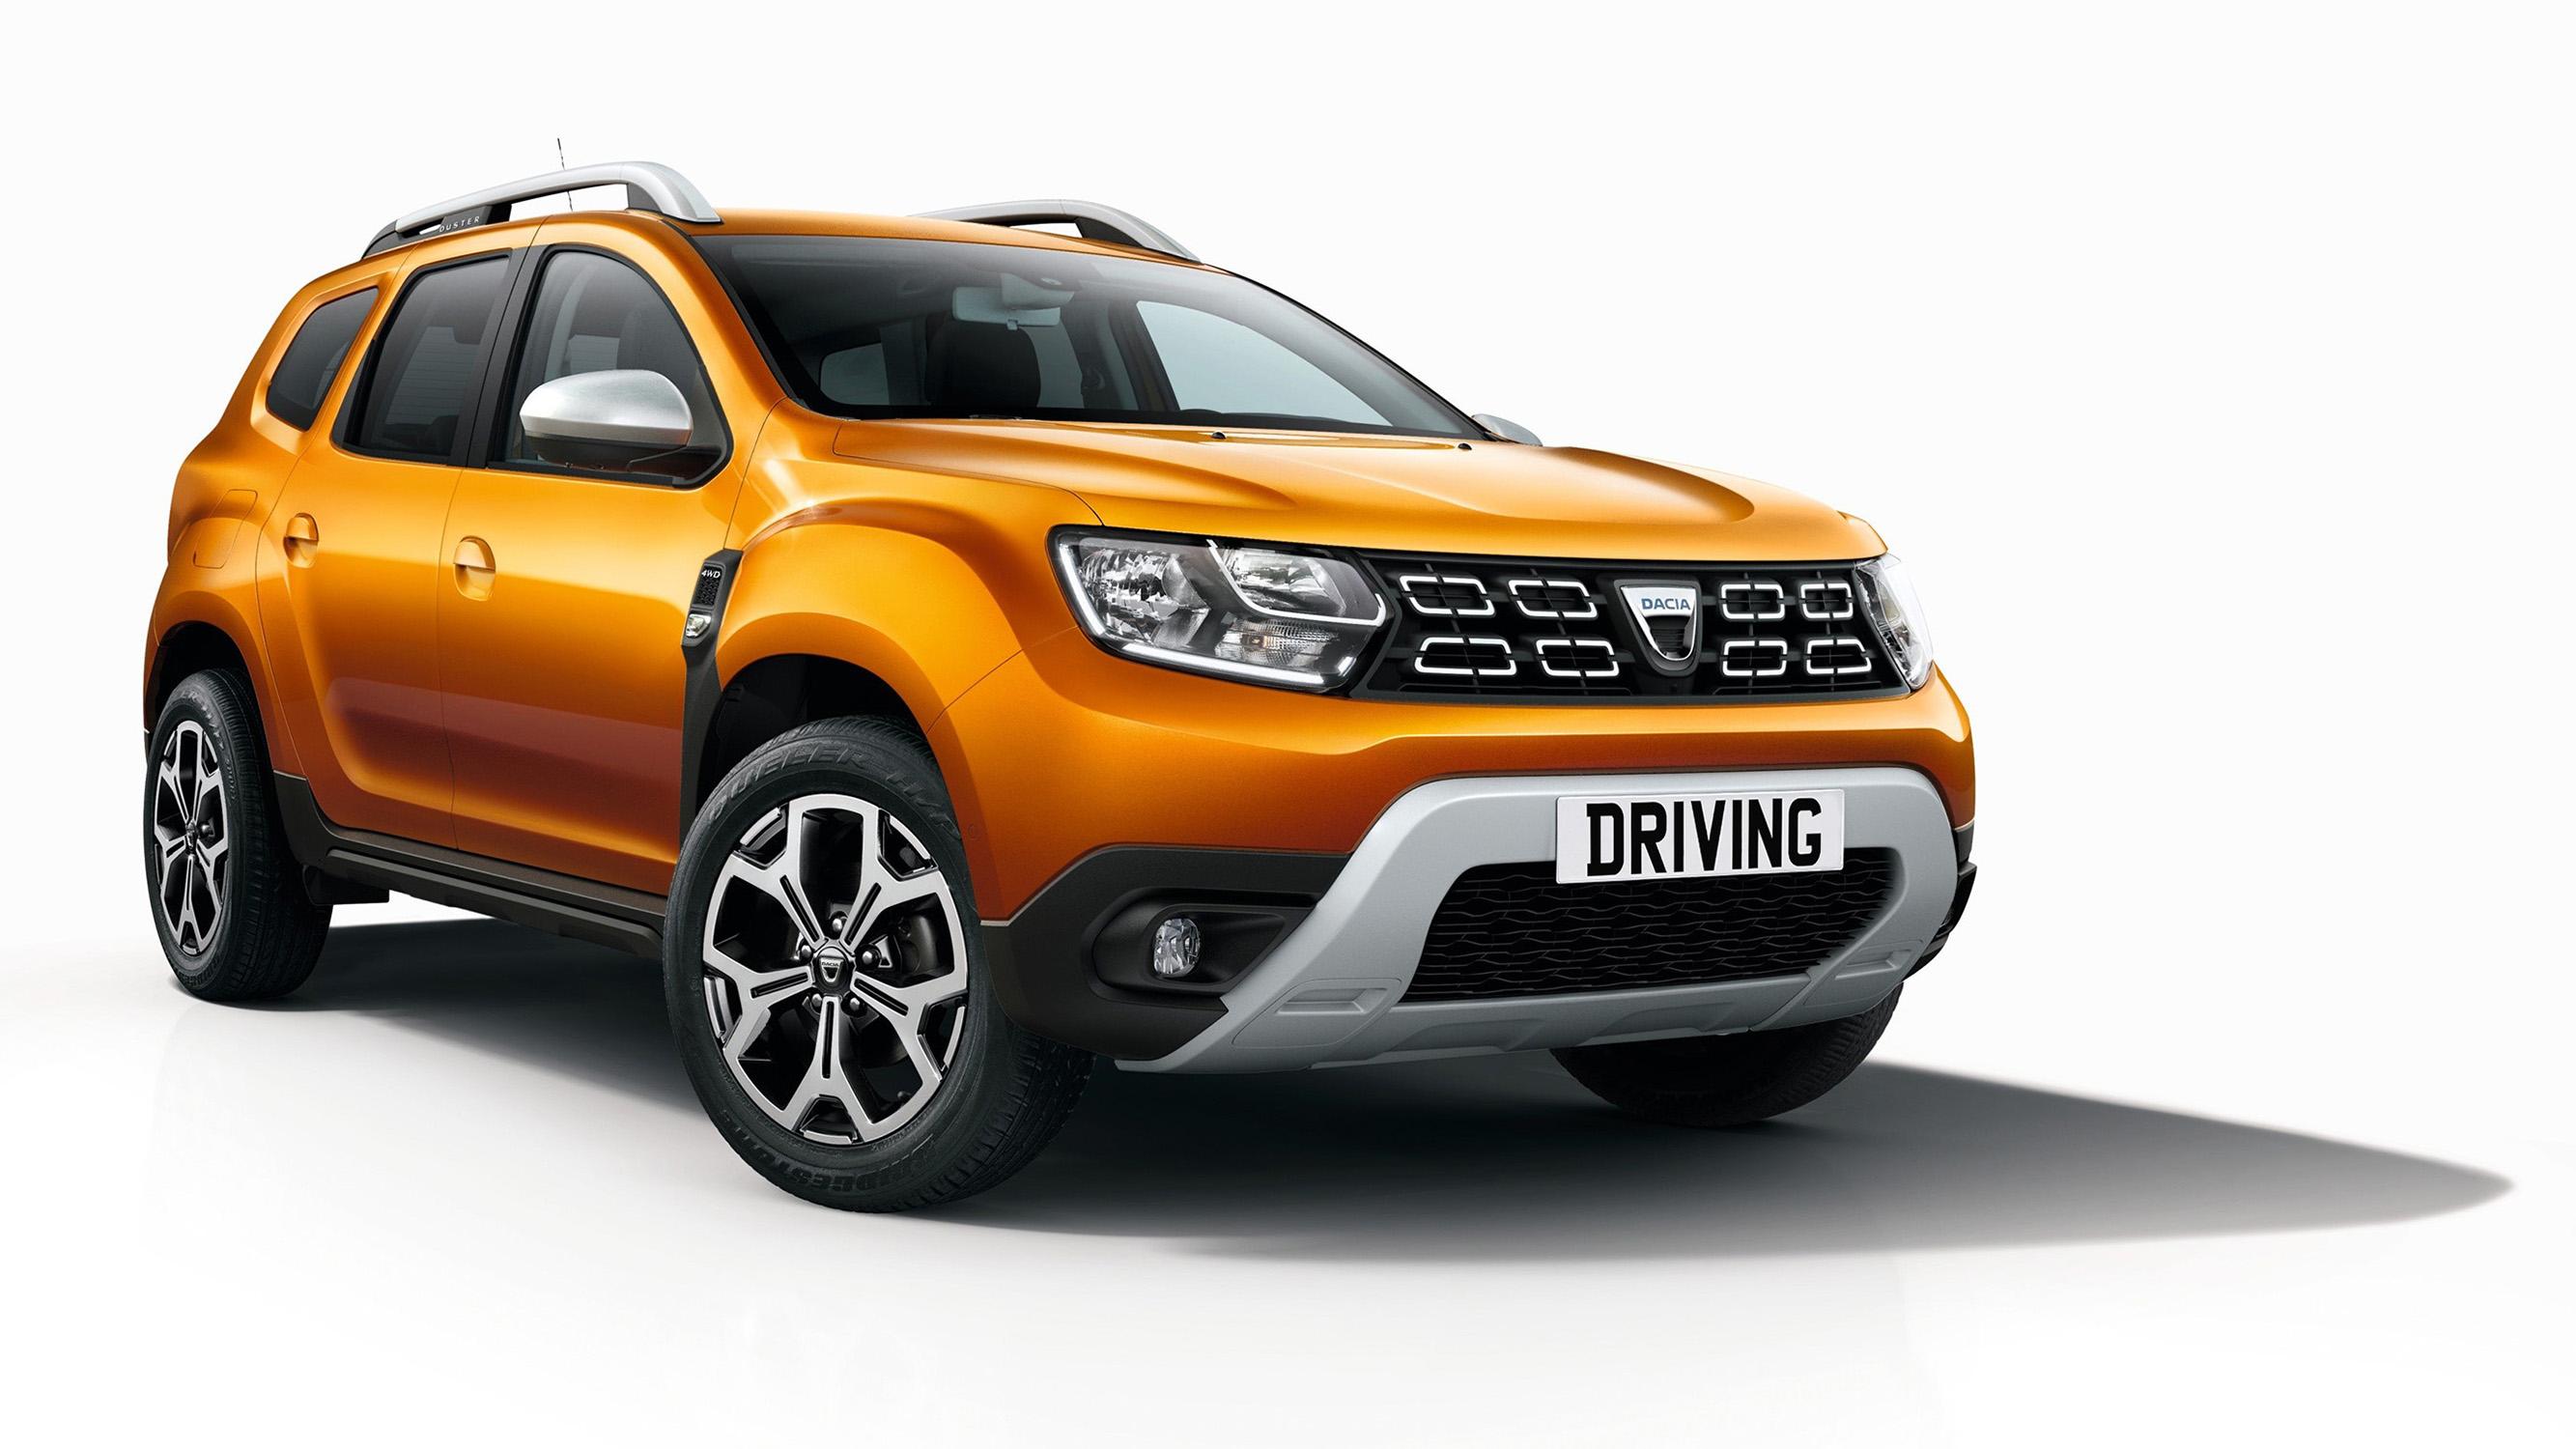 Jeremy Clarkson's worst cars of 2018: Dacia Duster